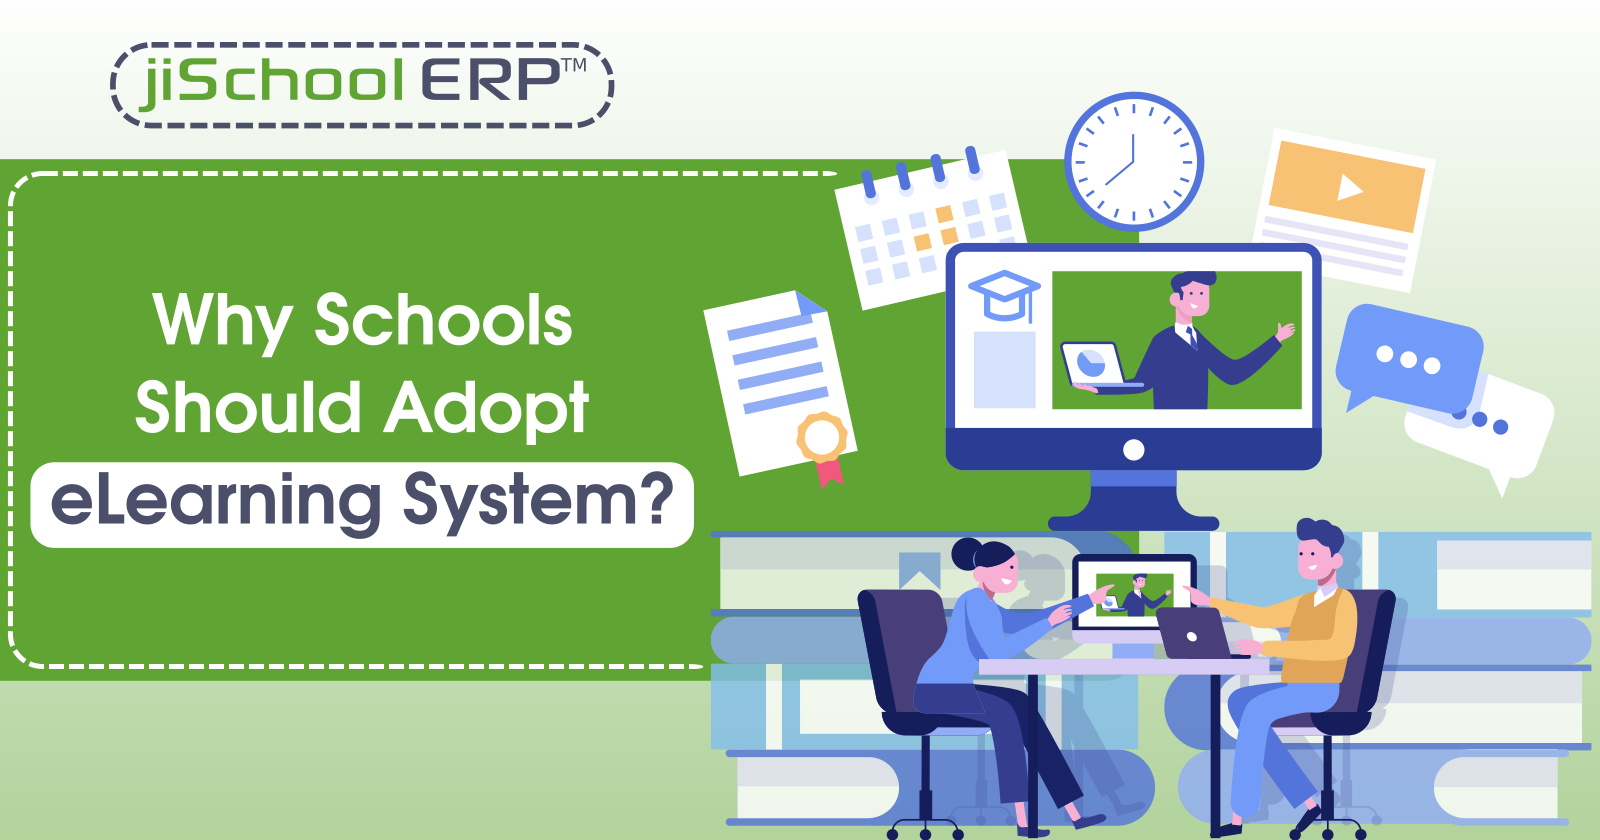 Why Schools Should Adopt eLearning System?